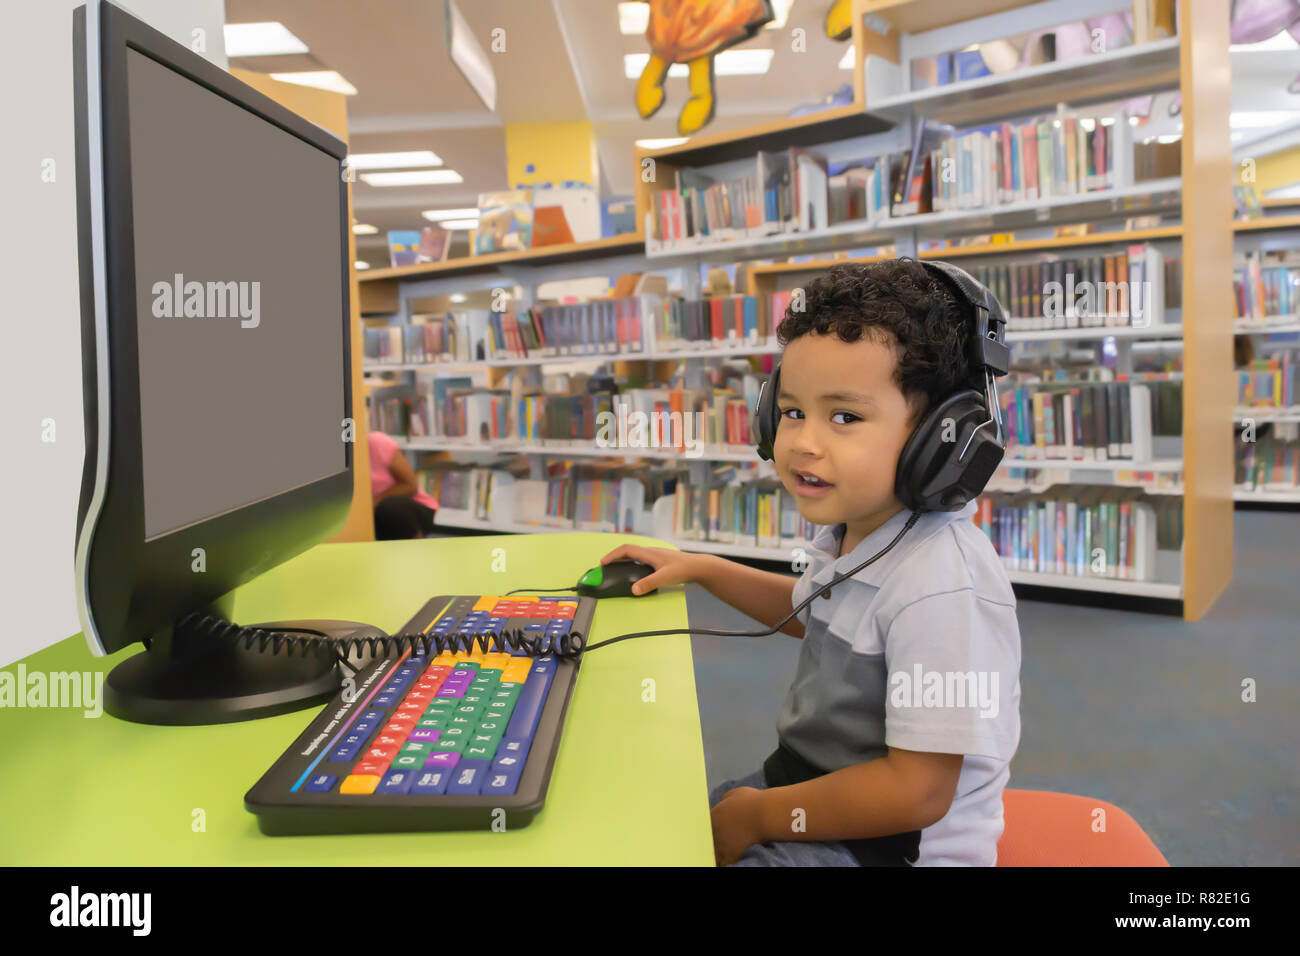 A  fun day at the community public library to play on the computer. The little boy sits at a desk in front of a computer with headphones looking. Stock Photo